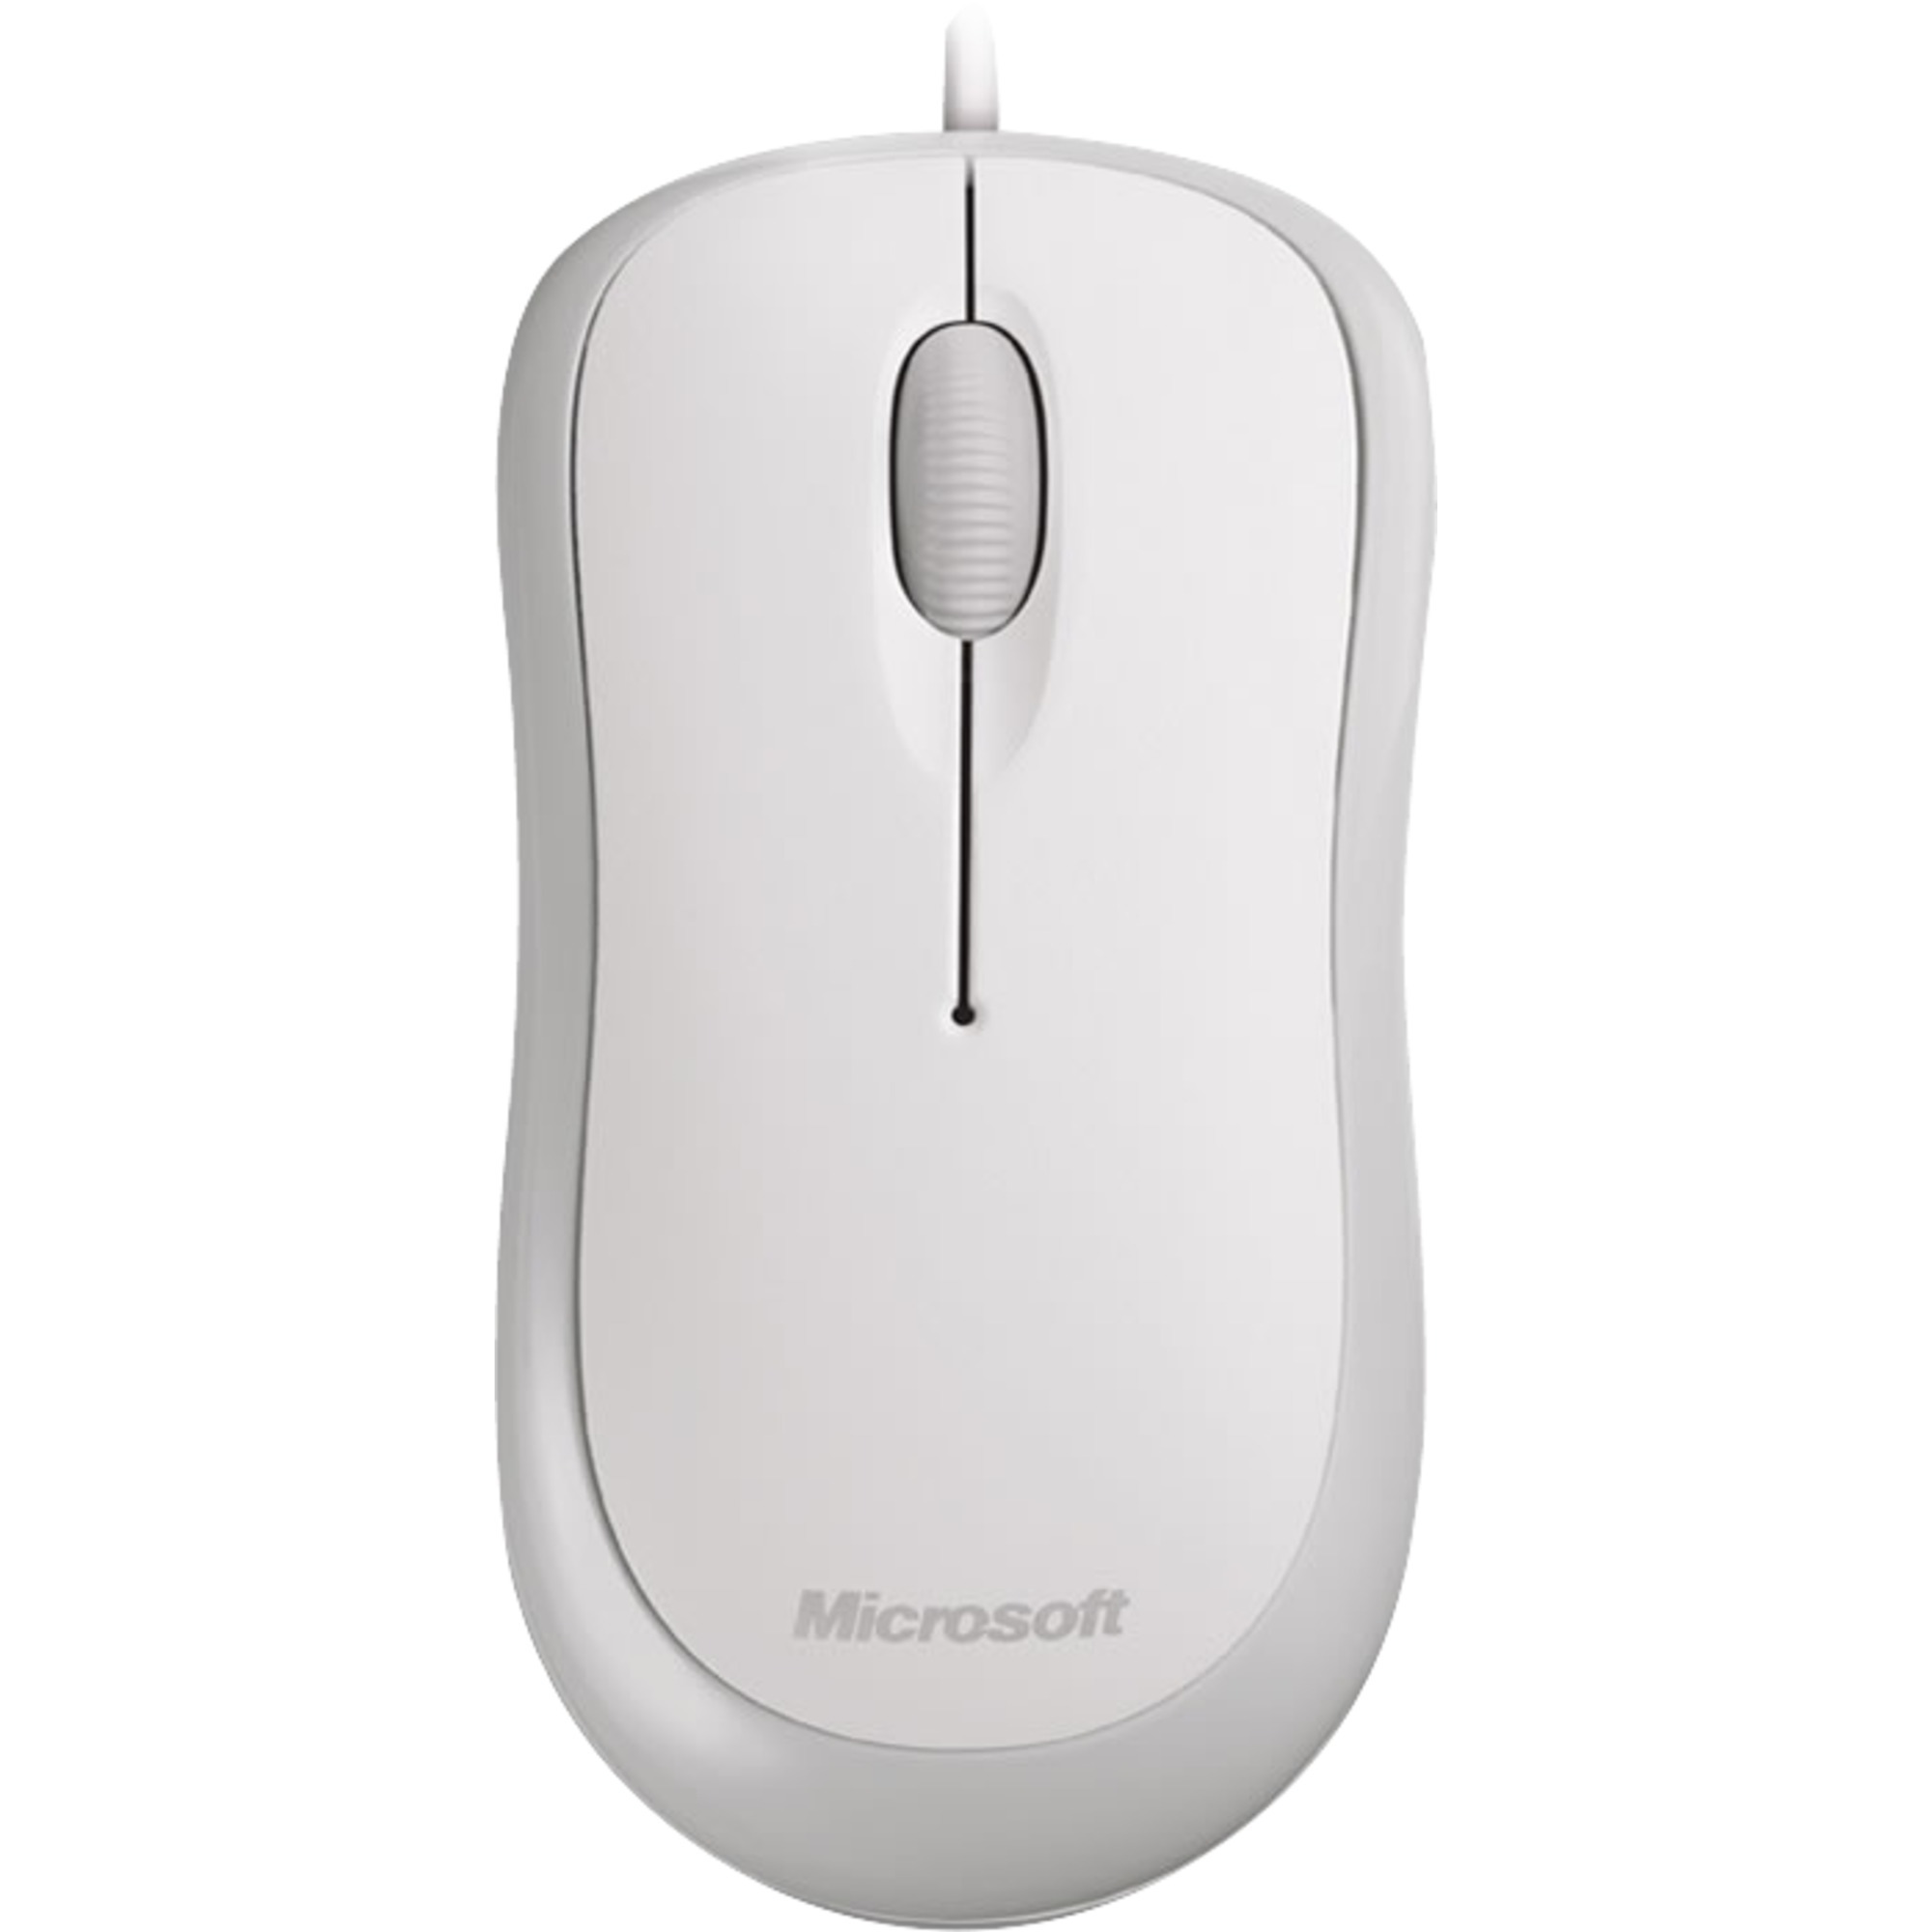 Image of Alternate - Basic Optical Mouse for Business, Maus online einkaufen bei Alternate